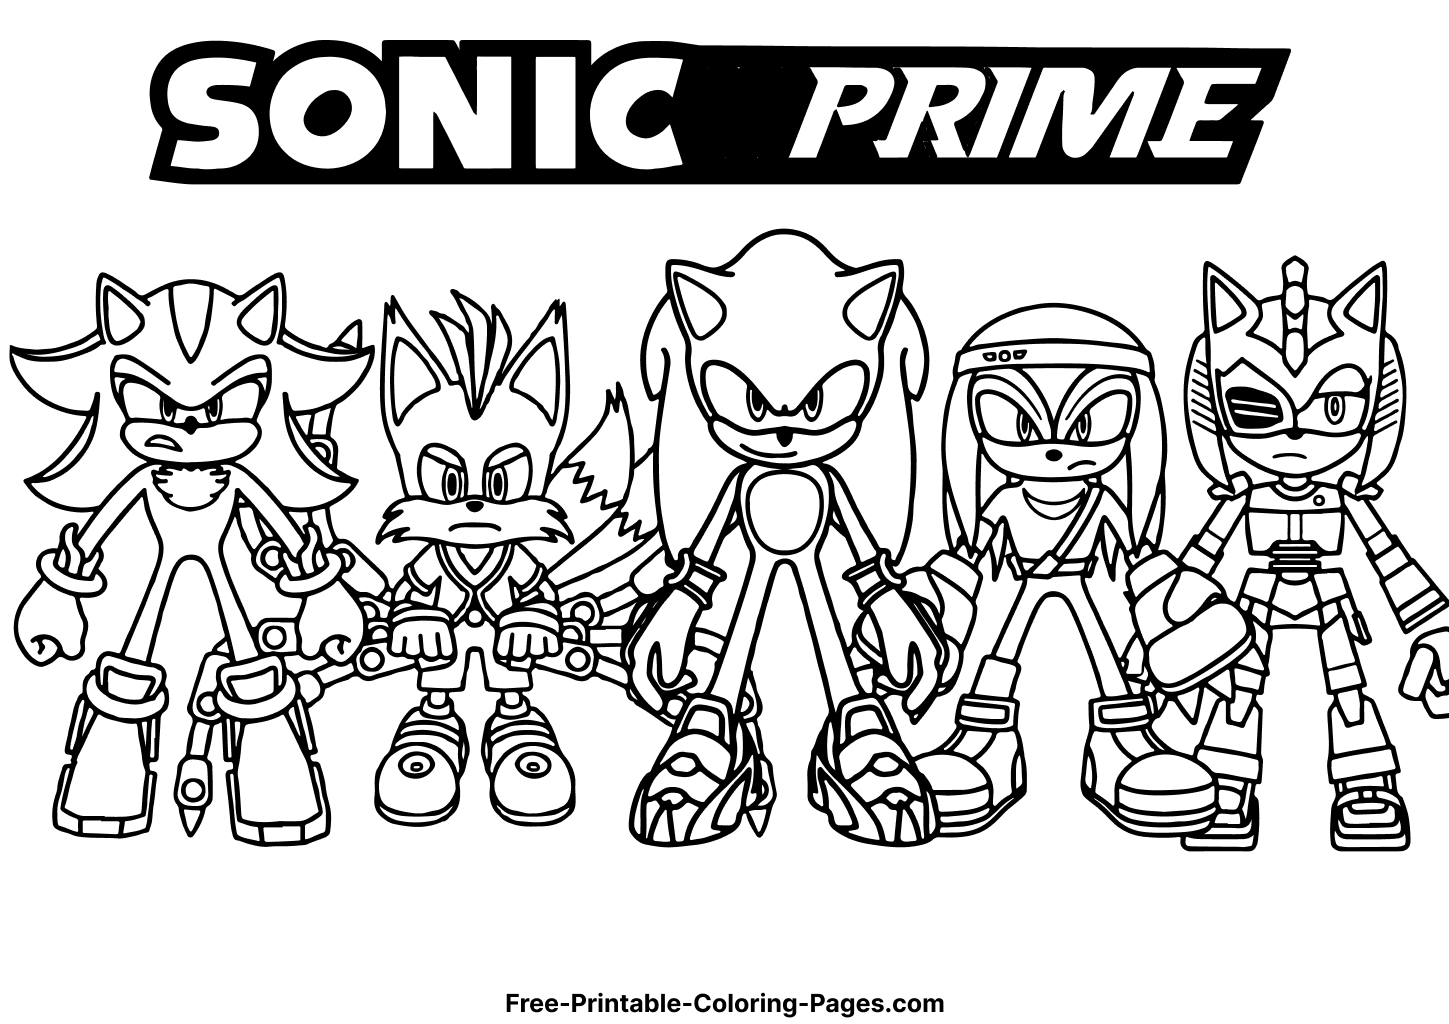 Sonic Prime coloring pages 1